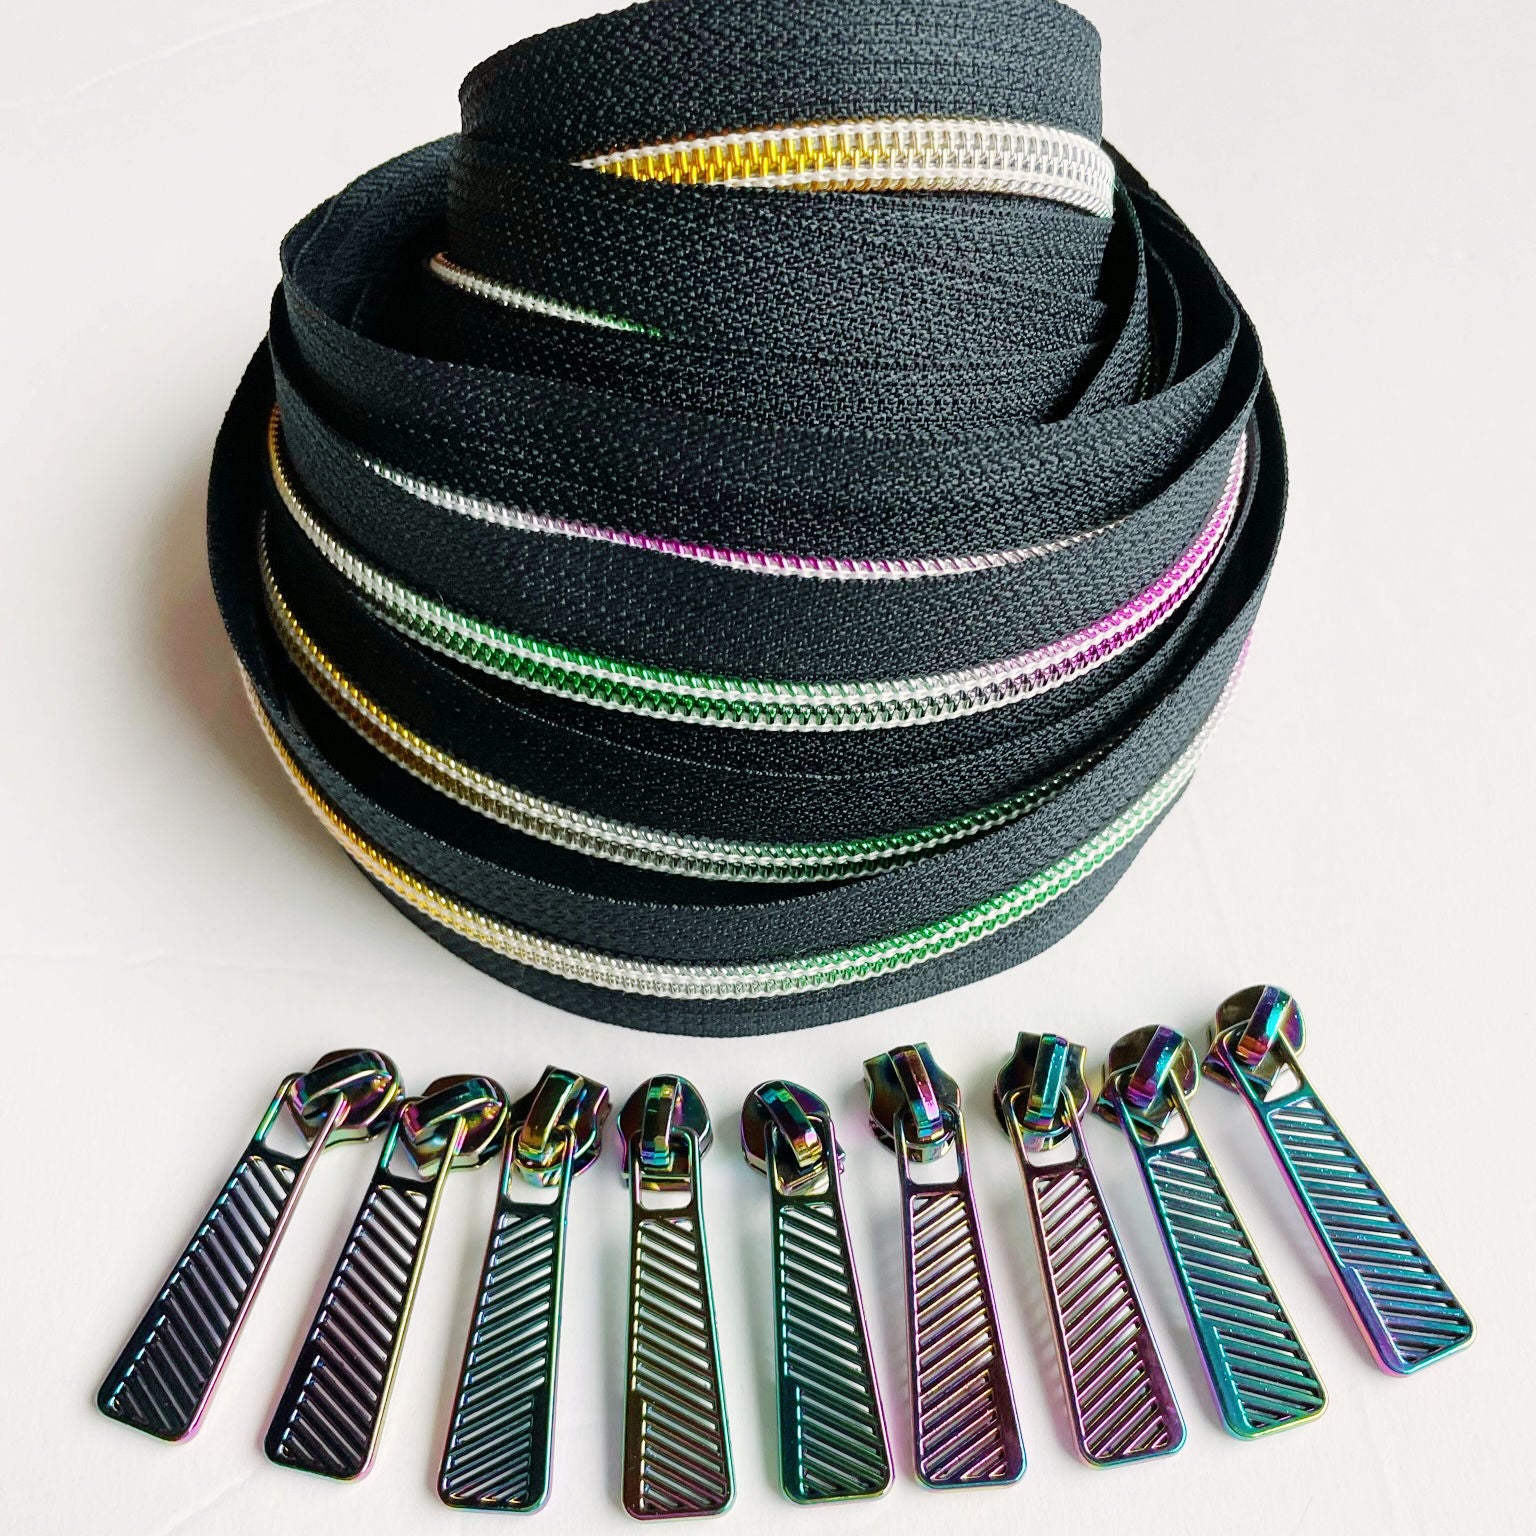  PECMER #5 Rainbow Zipper Tape by The Yard with Pulls-6 Yards  with 10Pcs Colorful Pulls Zippers for Sewing Assorted Lengths-Zippers for  Bags and Purses (Black Rainbow 6 Yard+10 pcs)